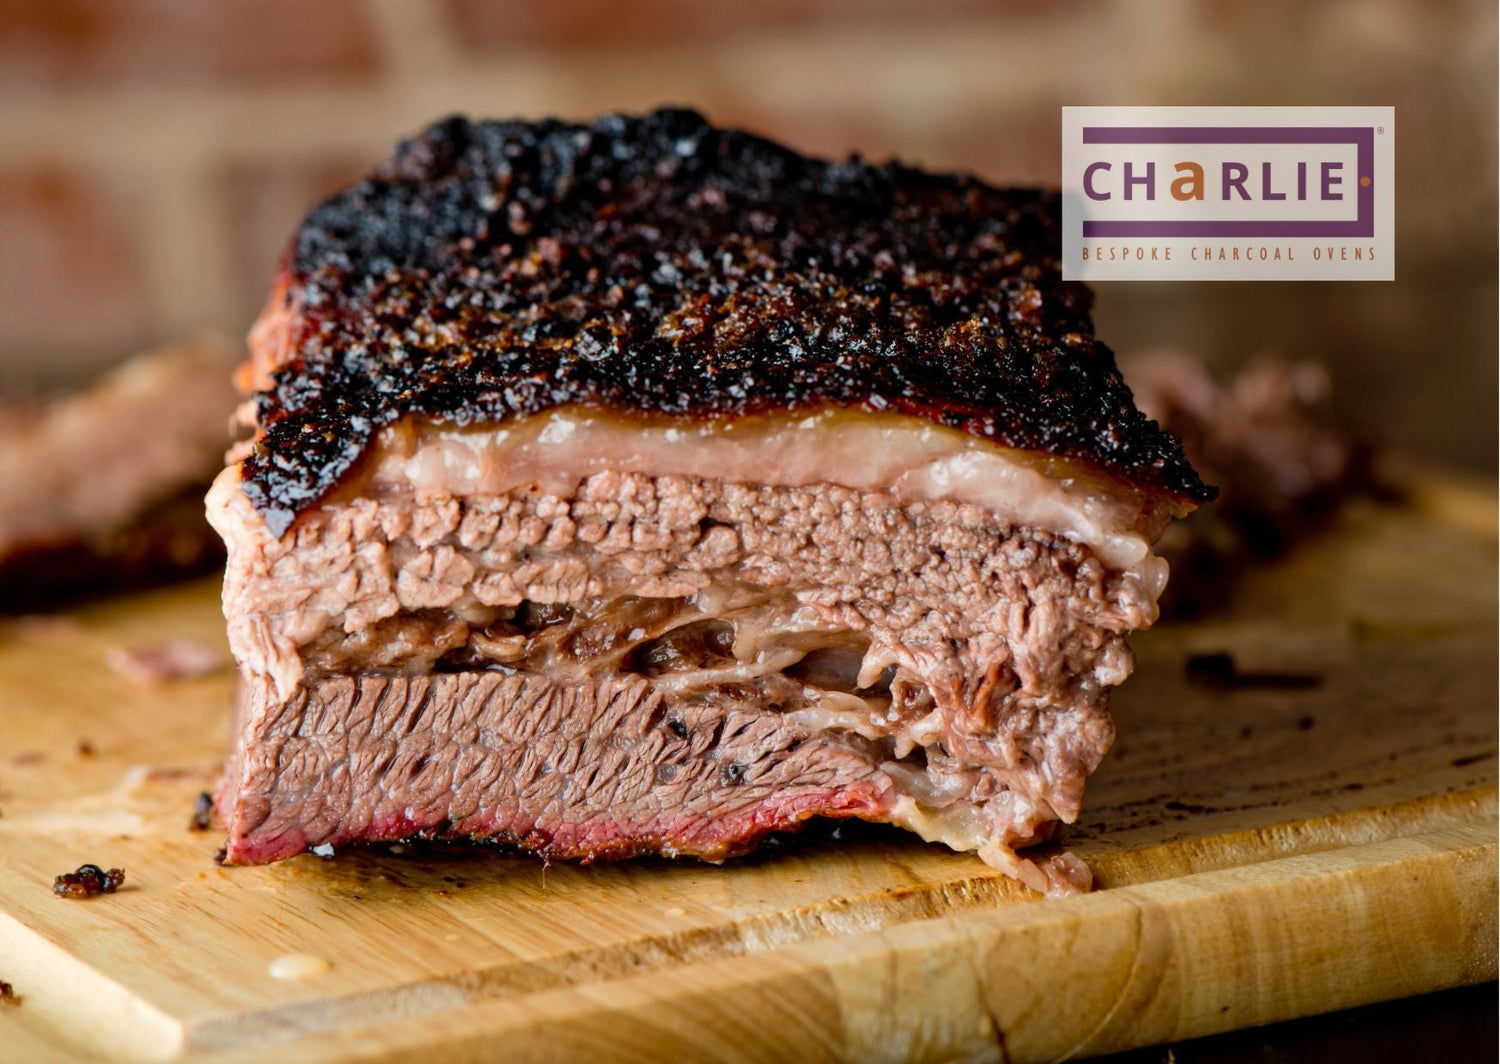 12 Top Tips For BBQ Smoked Brisket - Charlie Oven